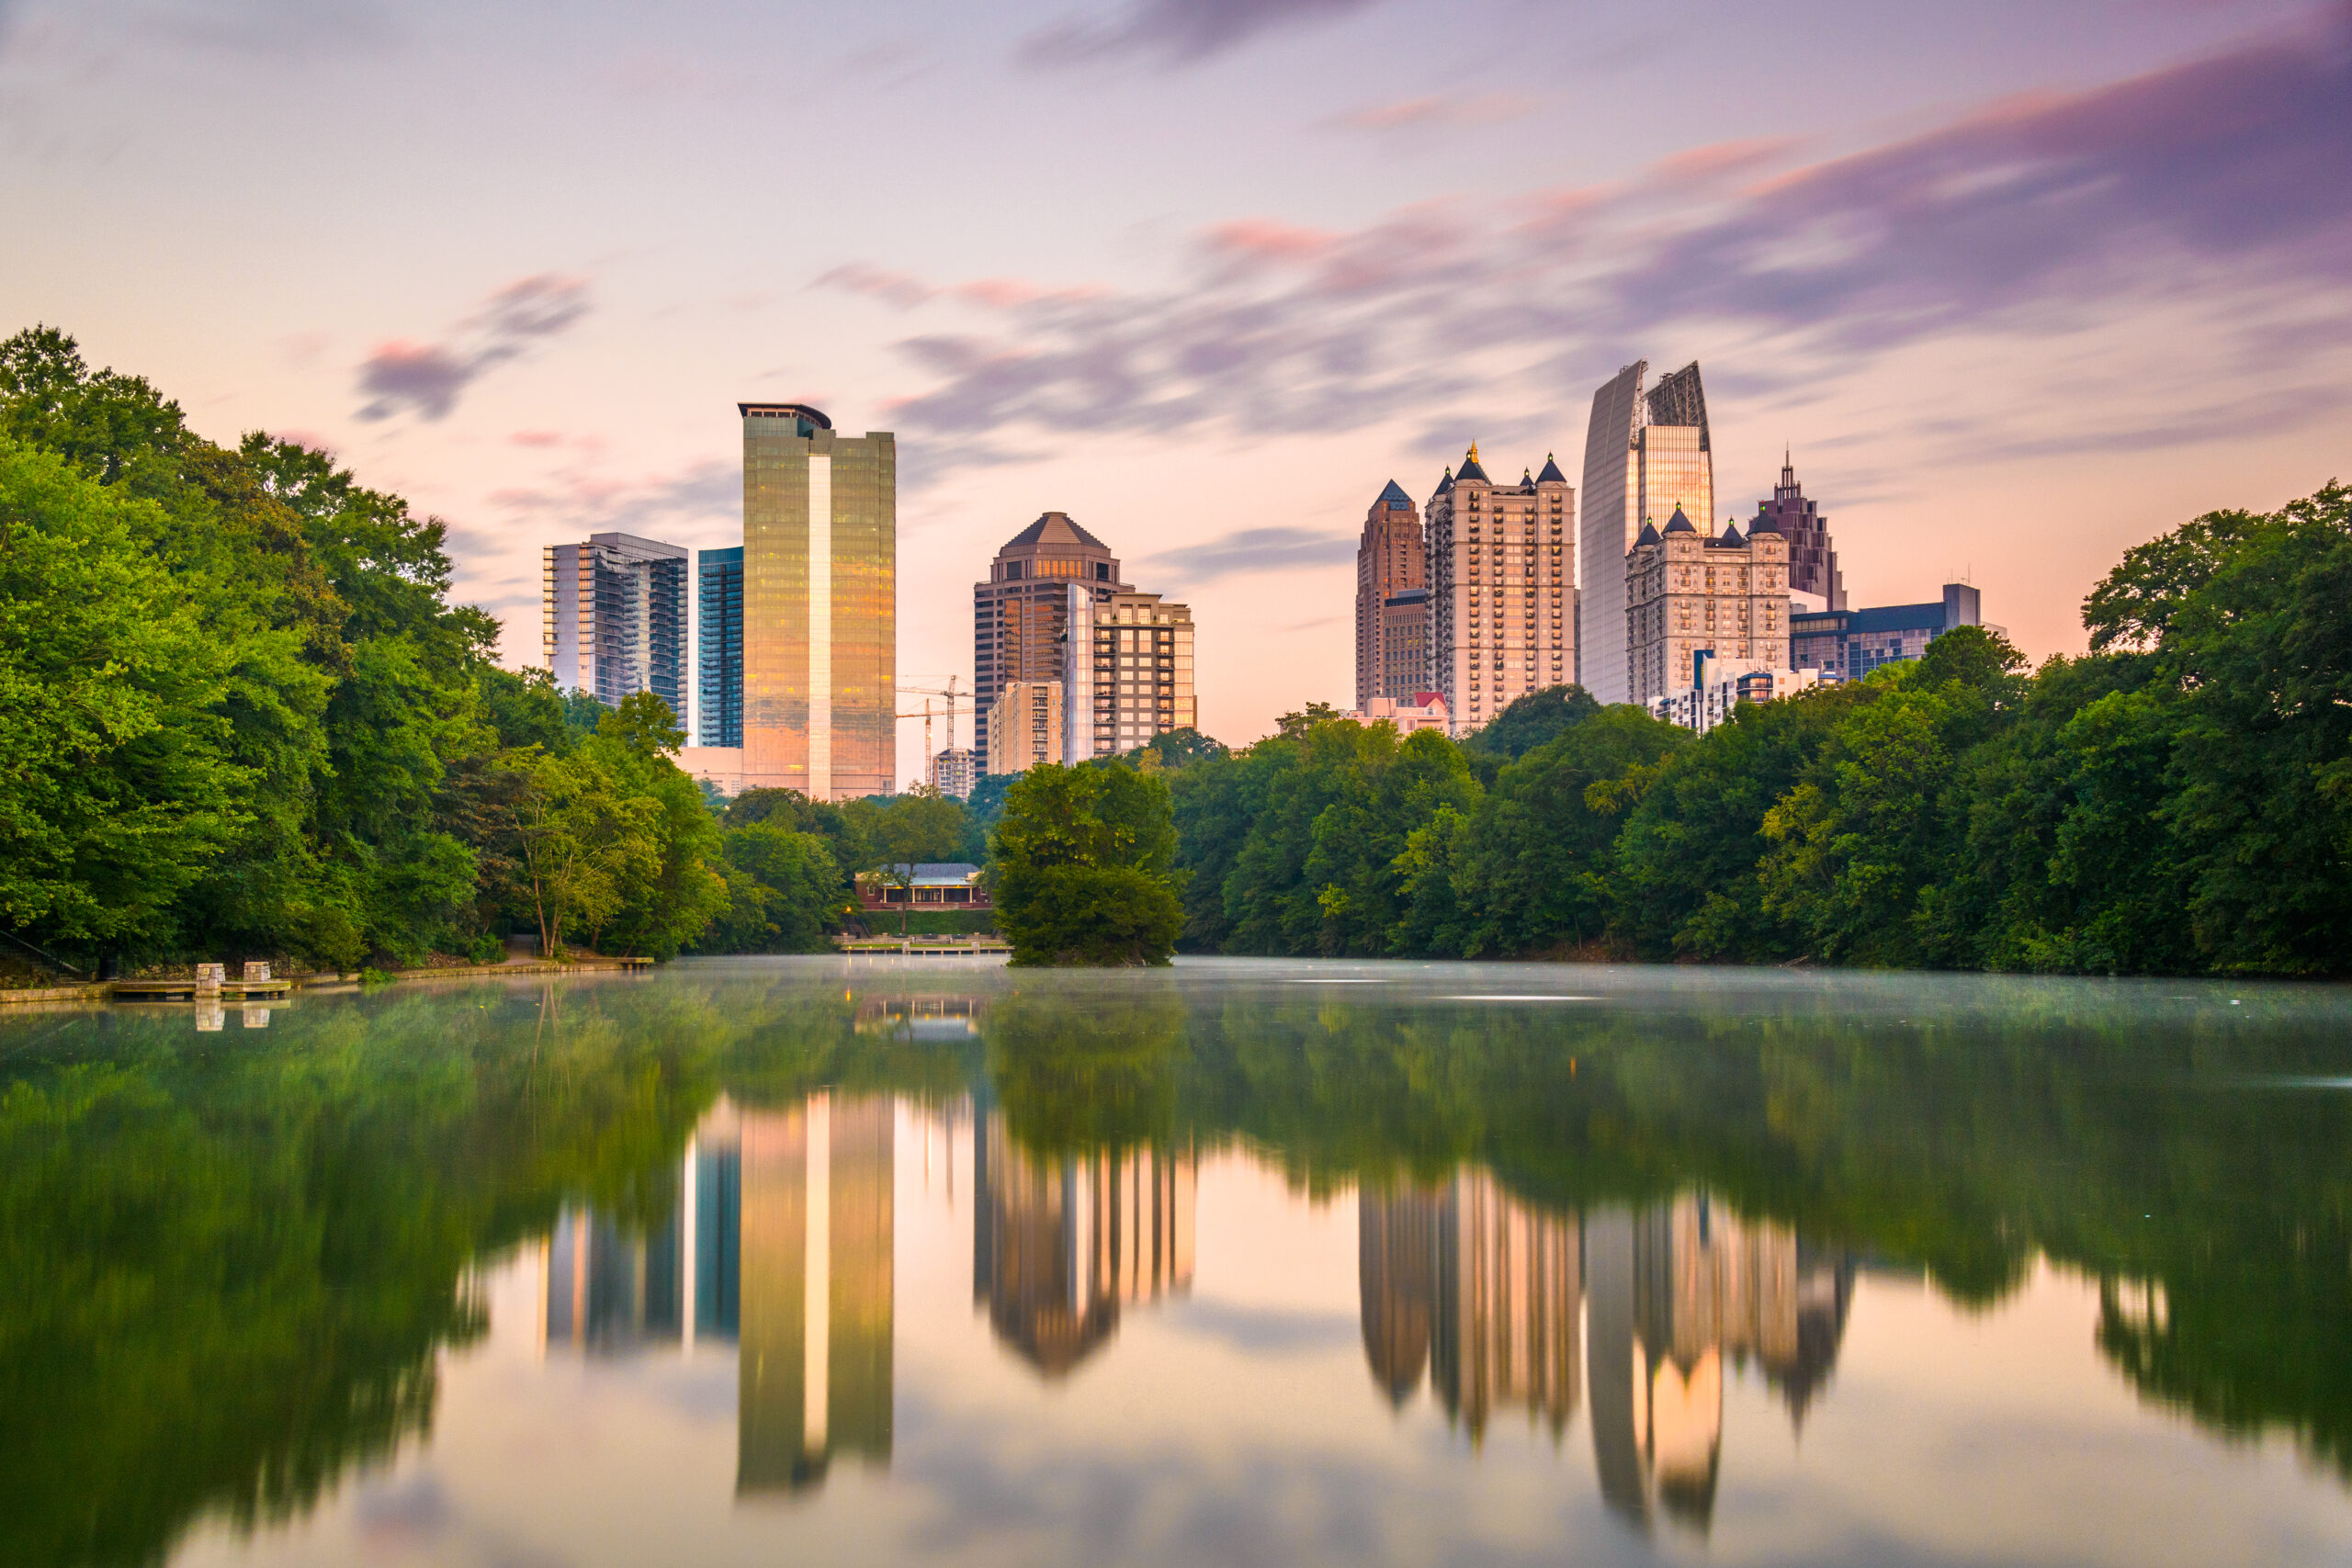 The Peachtree Road Race city skyline is reflected in a body of water.